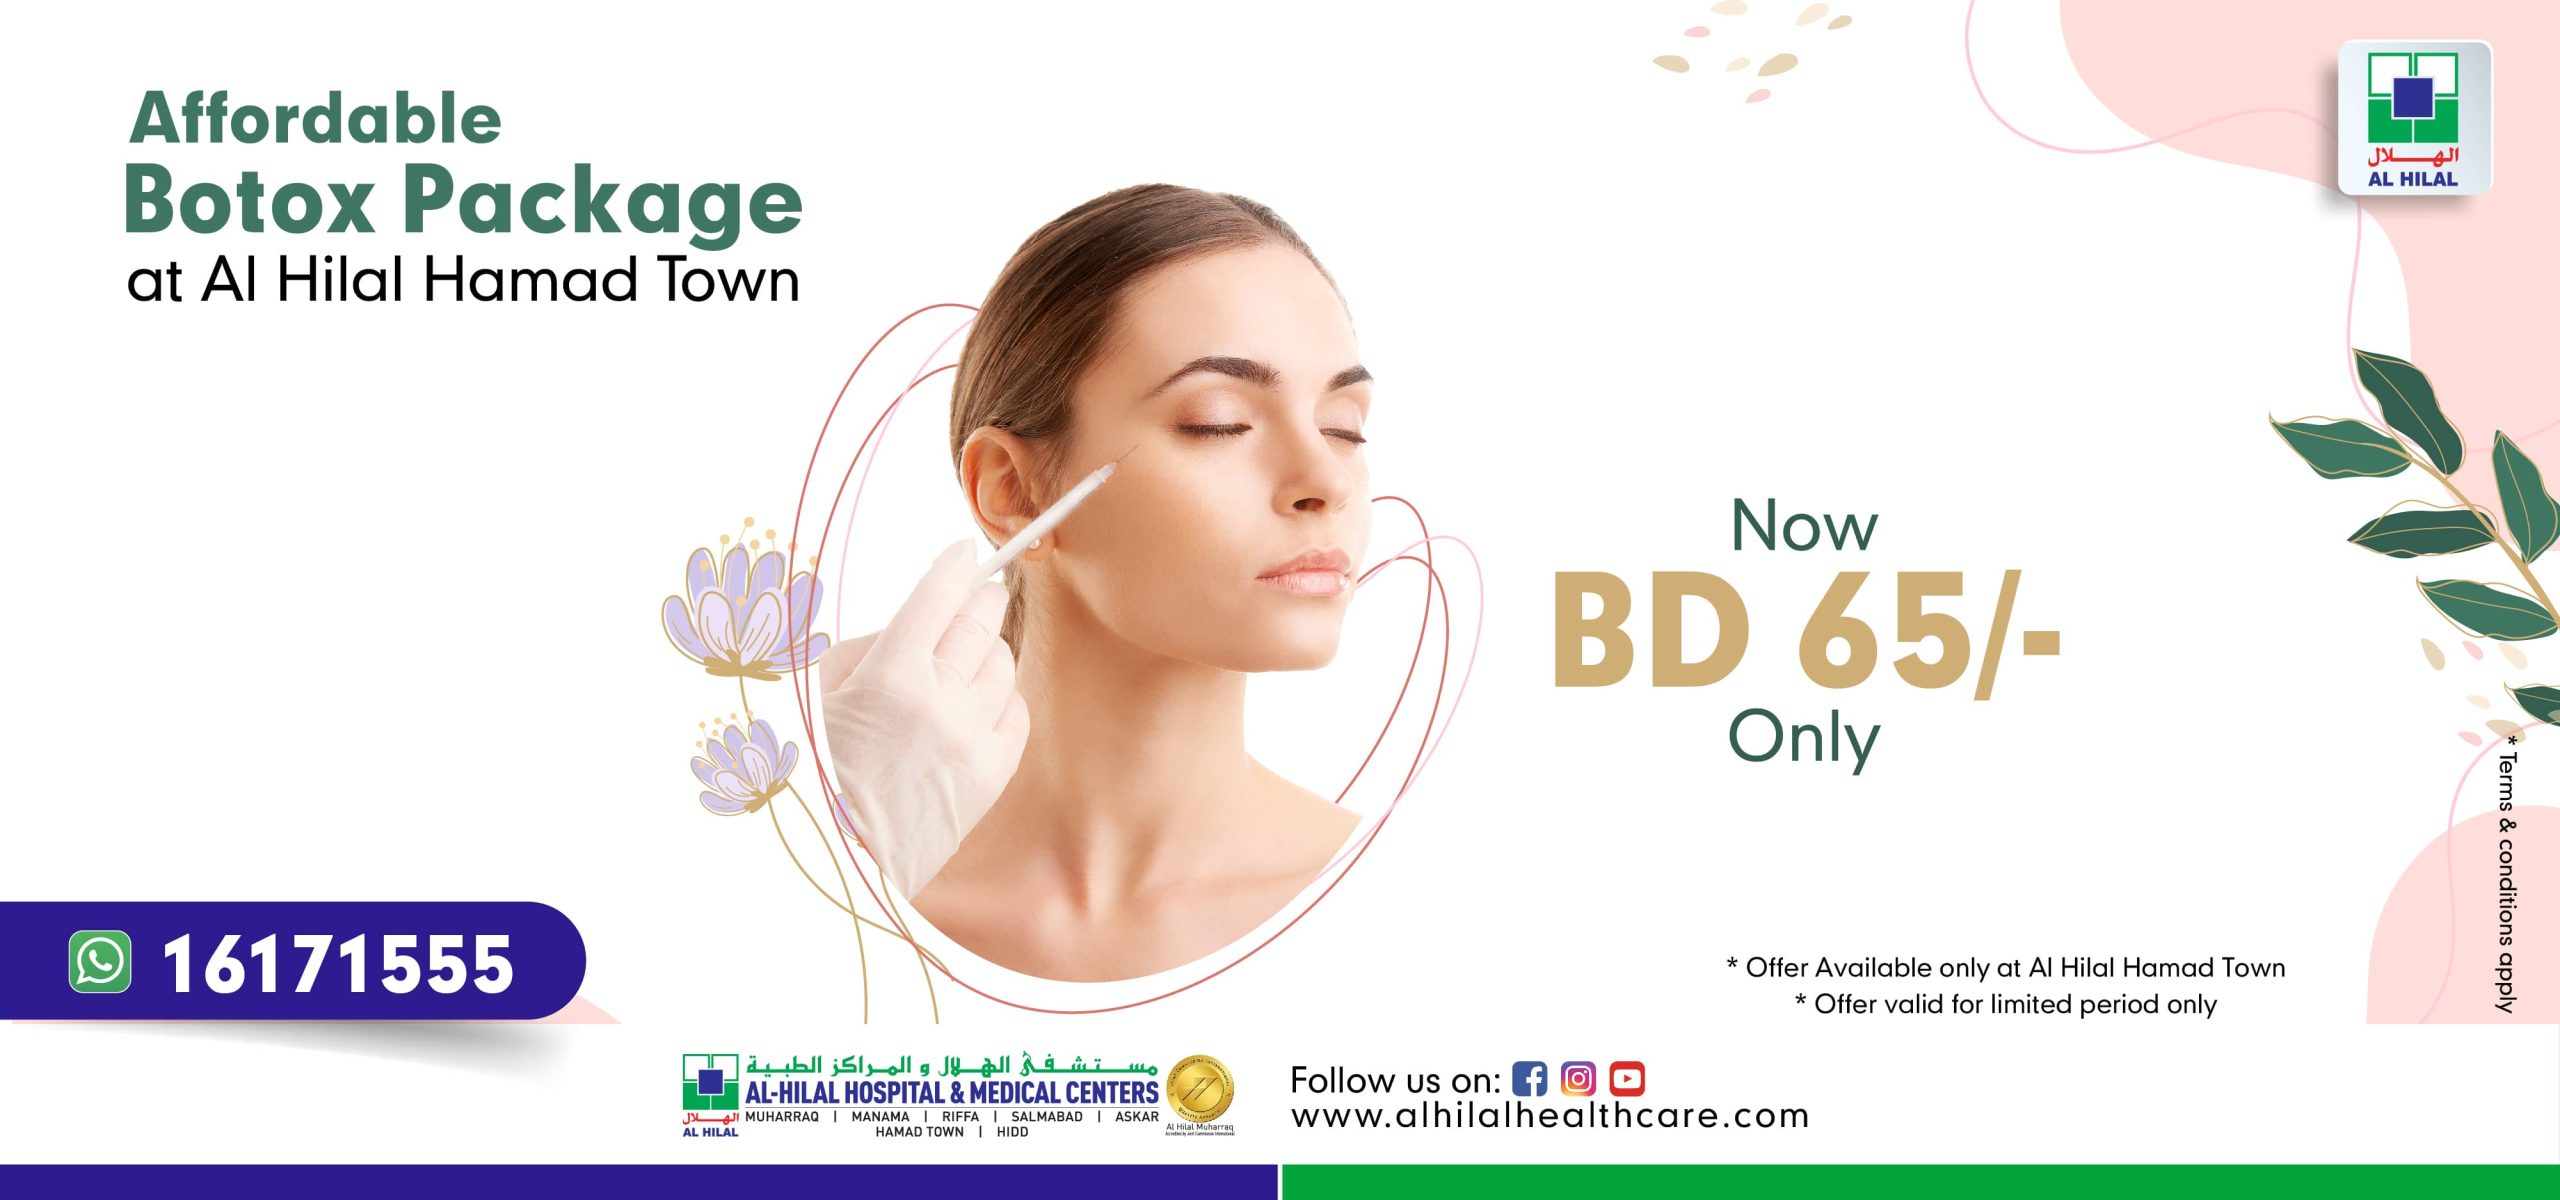 Mobile-Banner-Botox-Package-960-pxls-x-450-pxls-1-scaled